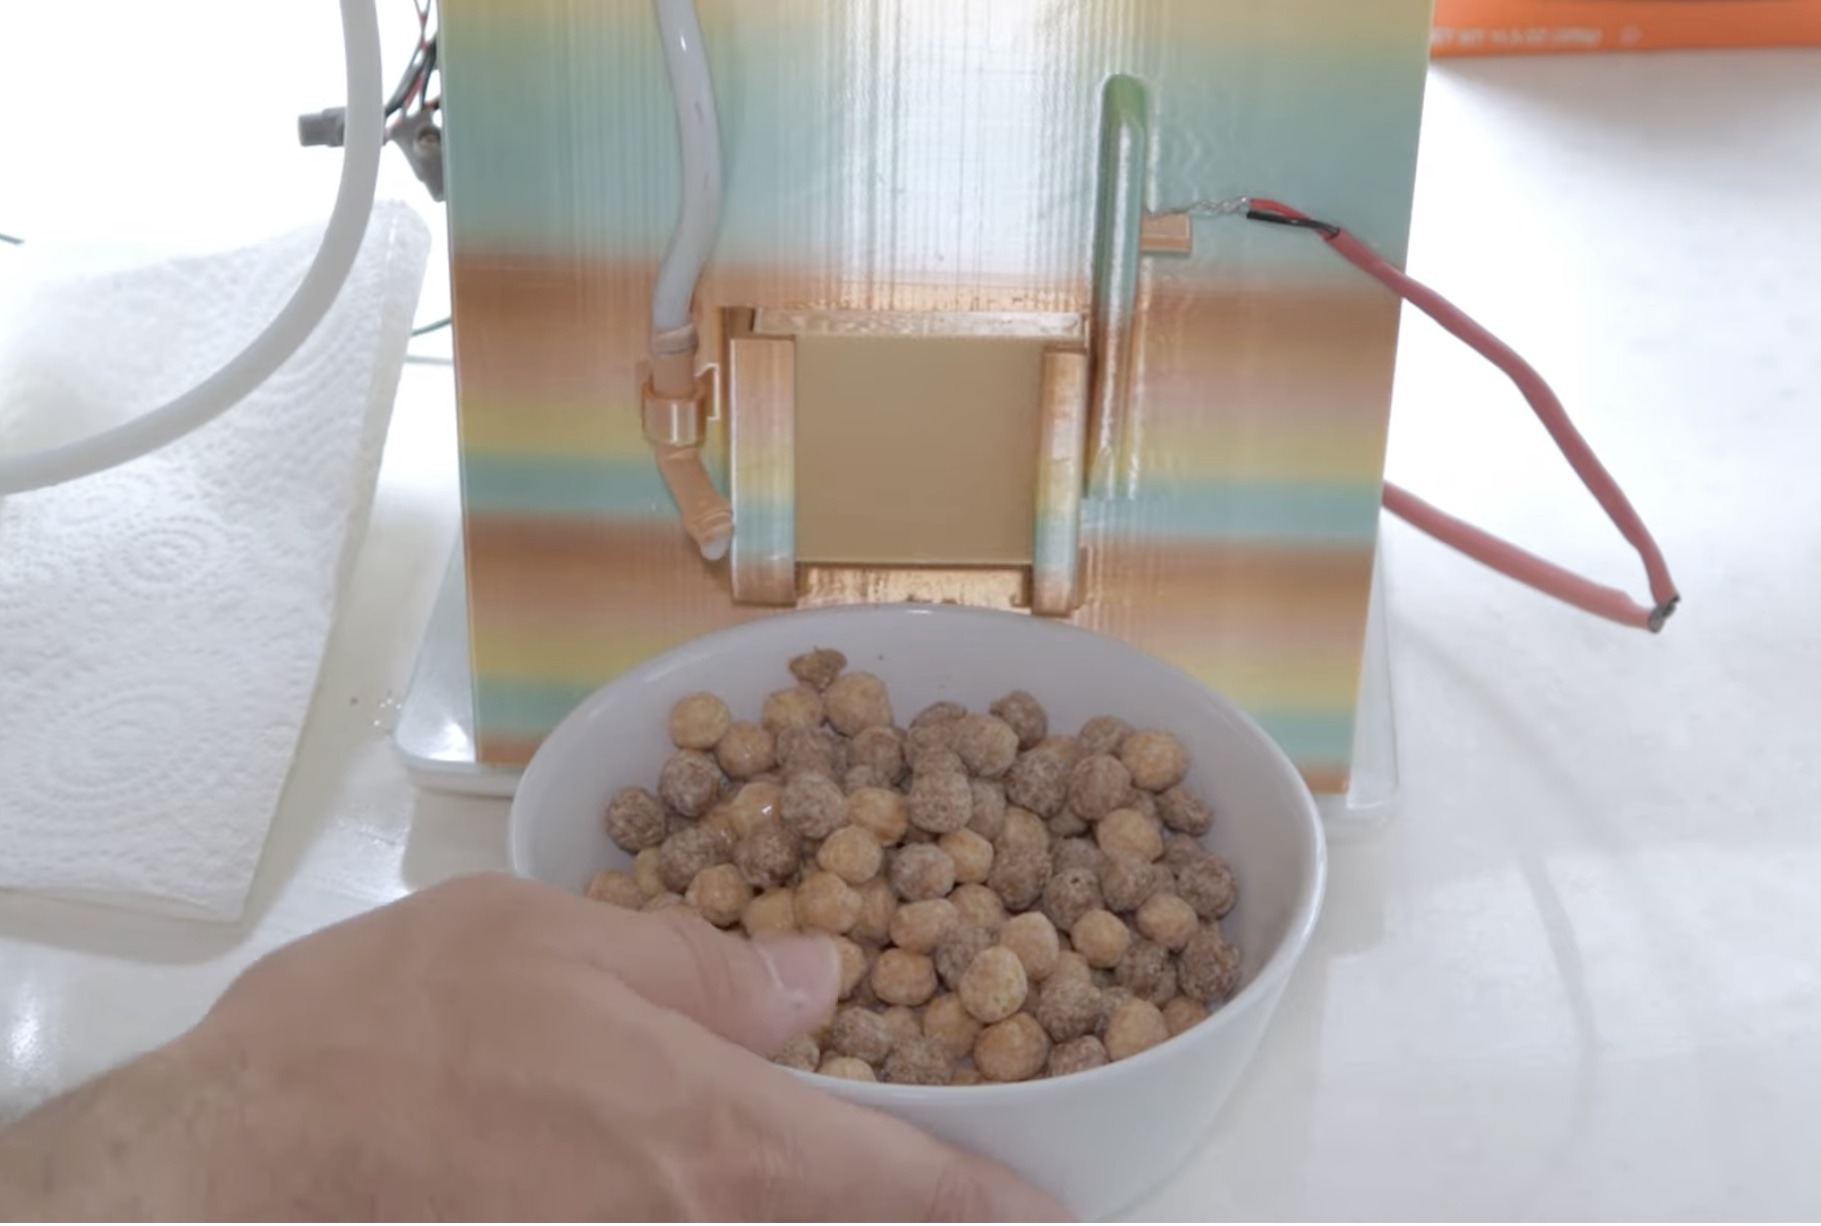 This Arduino-controlled machine dispenses the perfect bowl of cereal